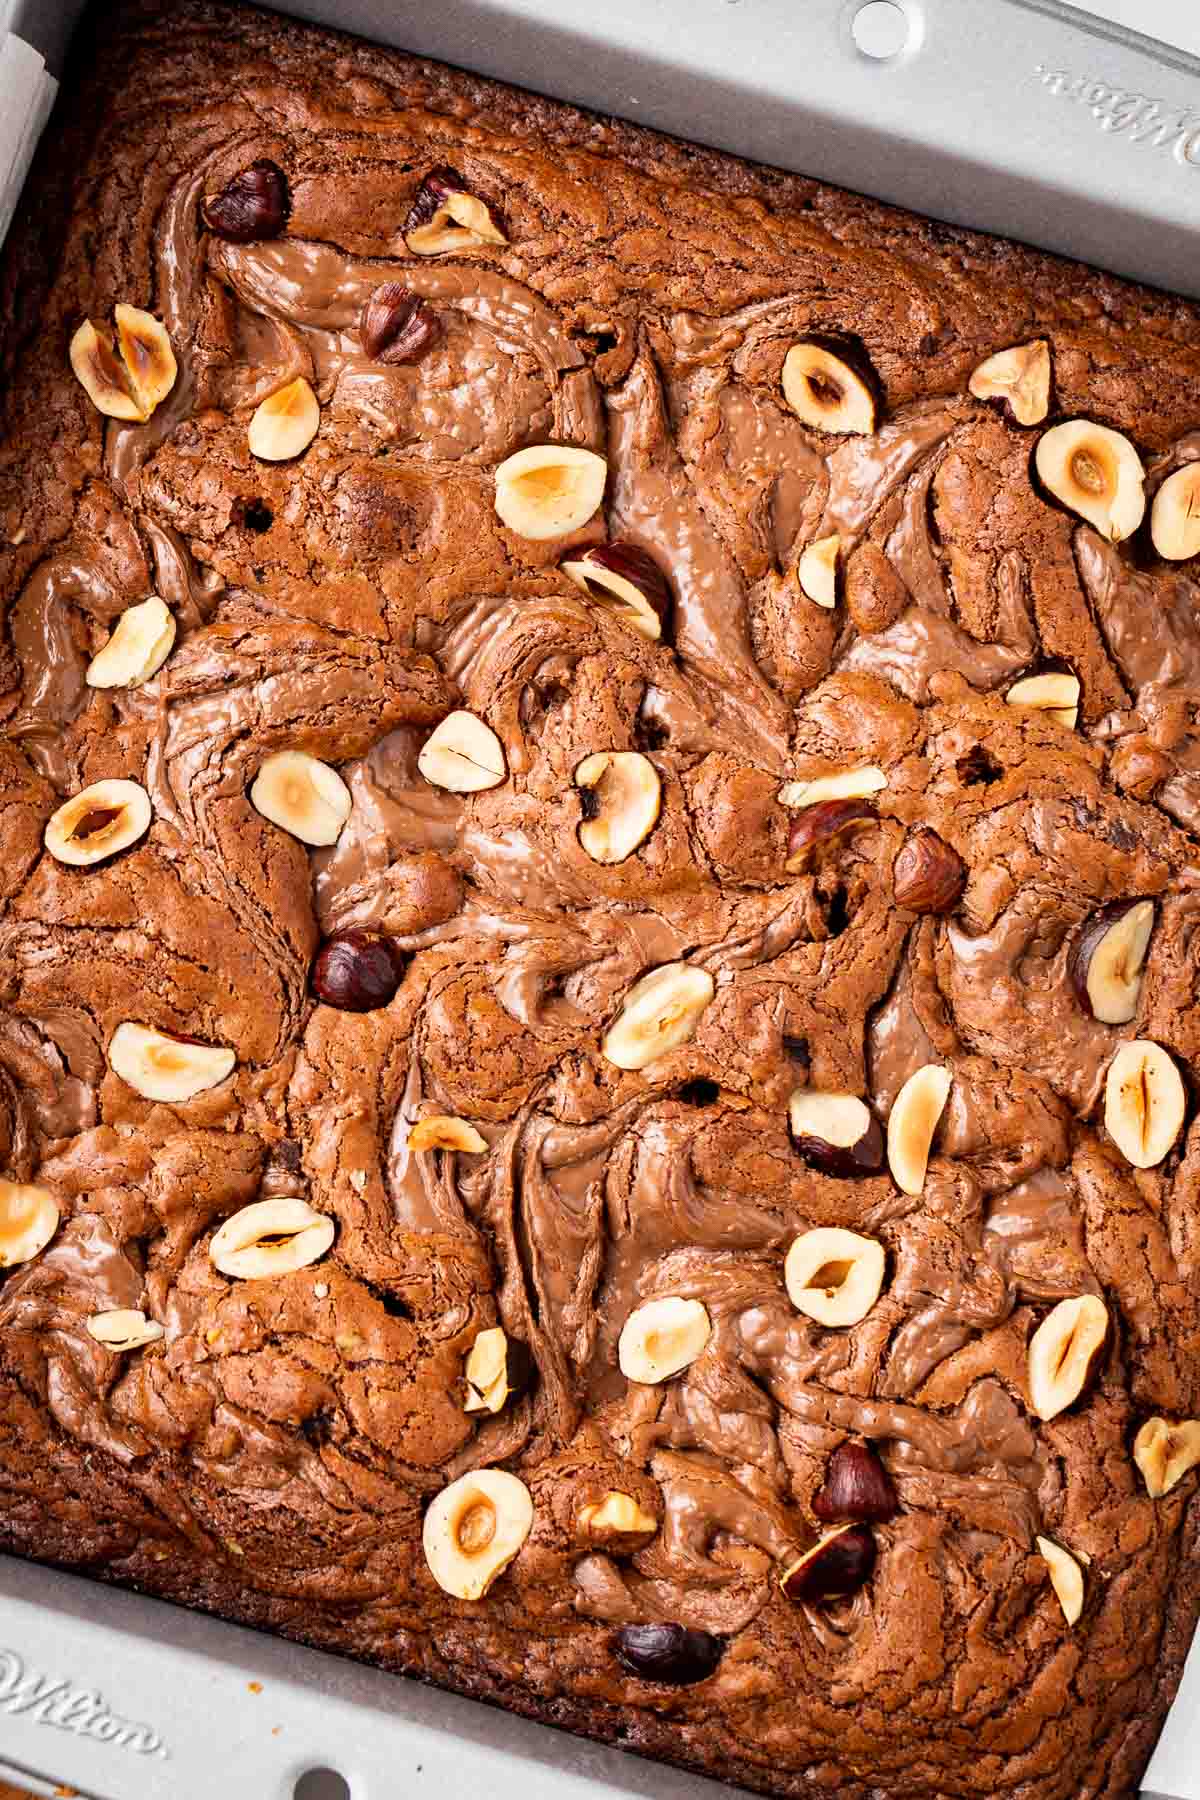 Brownies sprinkled with hazelnuts and swirls of Nutella.